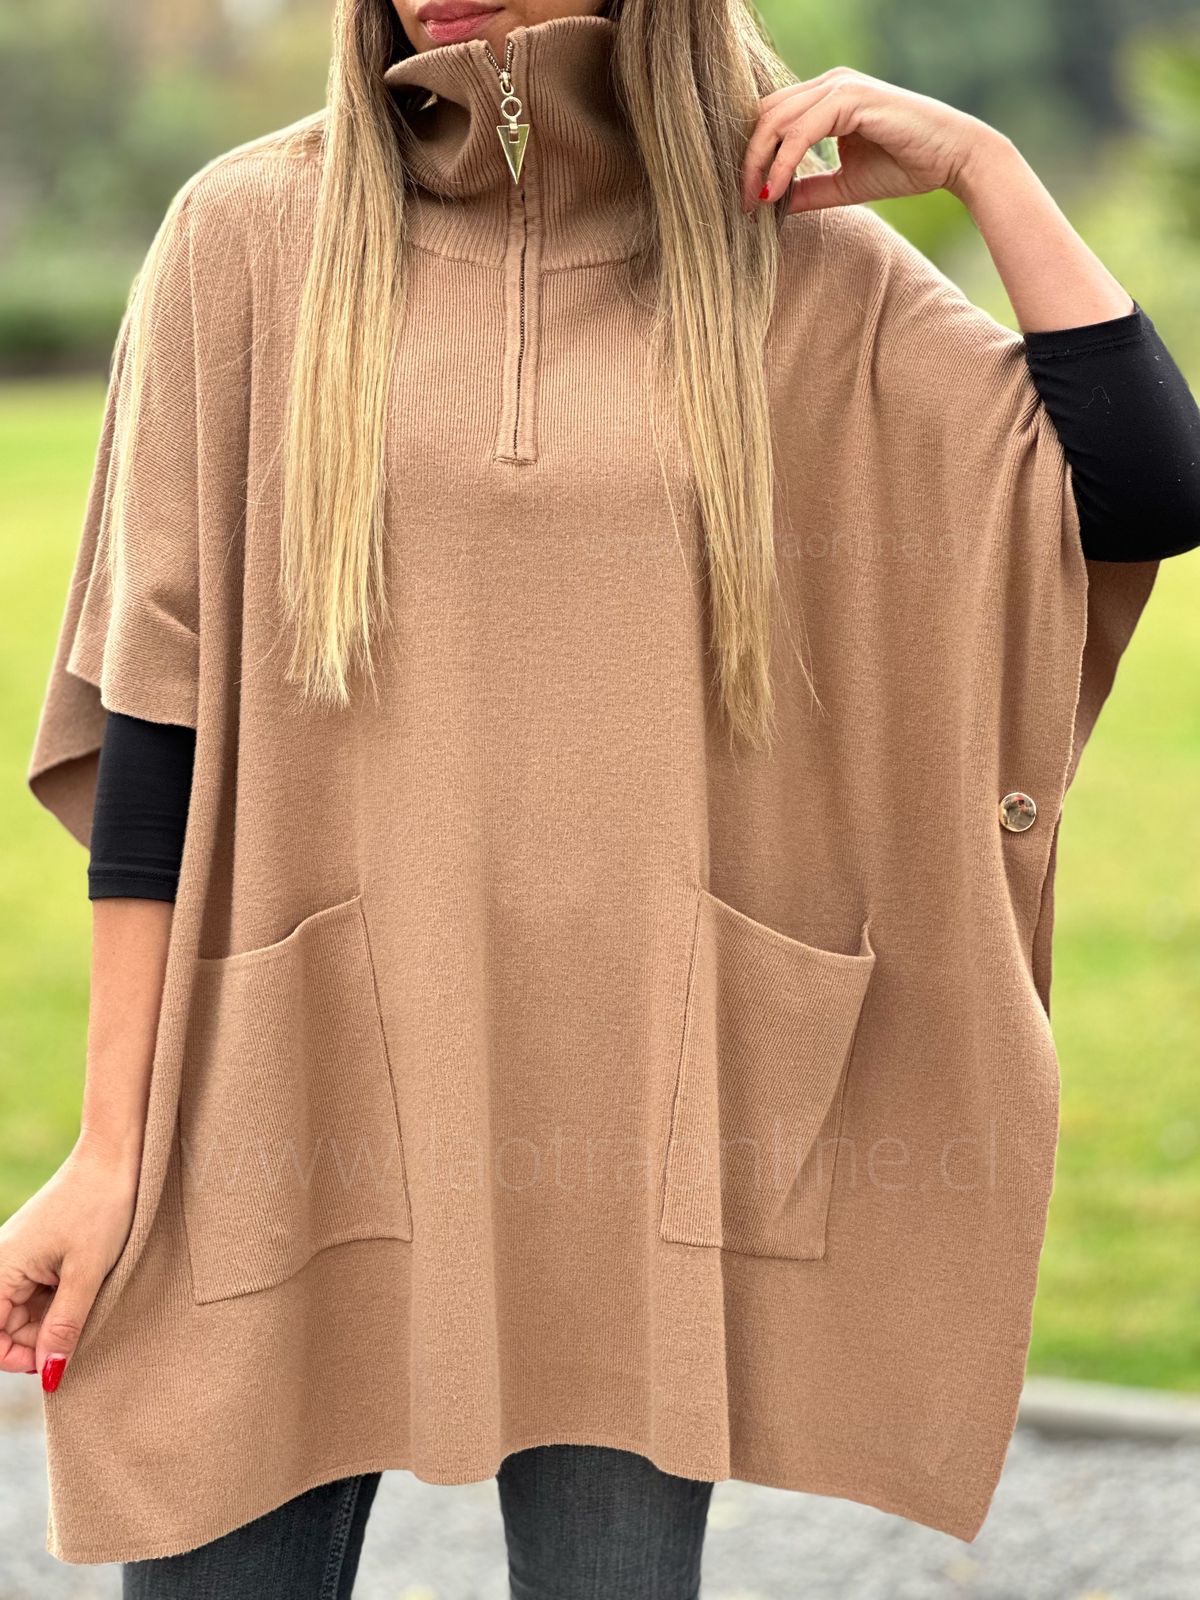 Sweater/Poncho Asia toffe